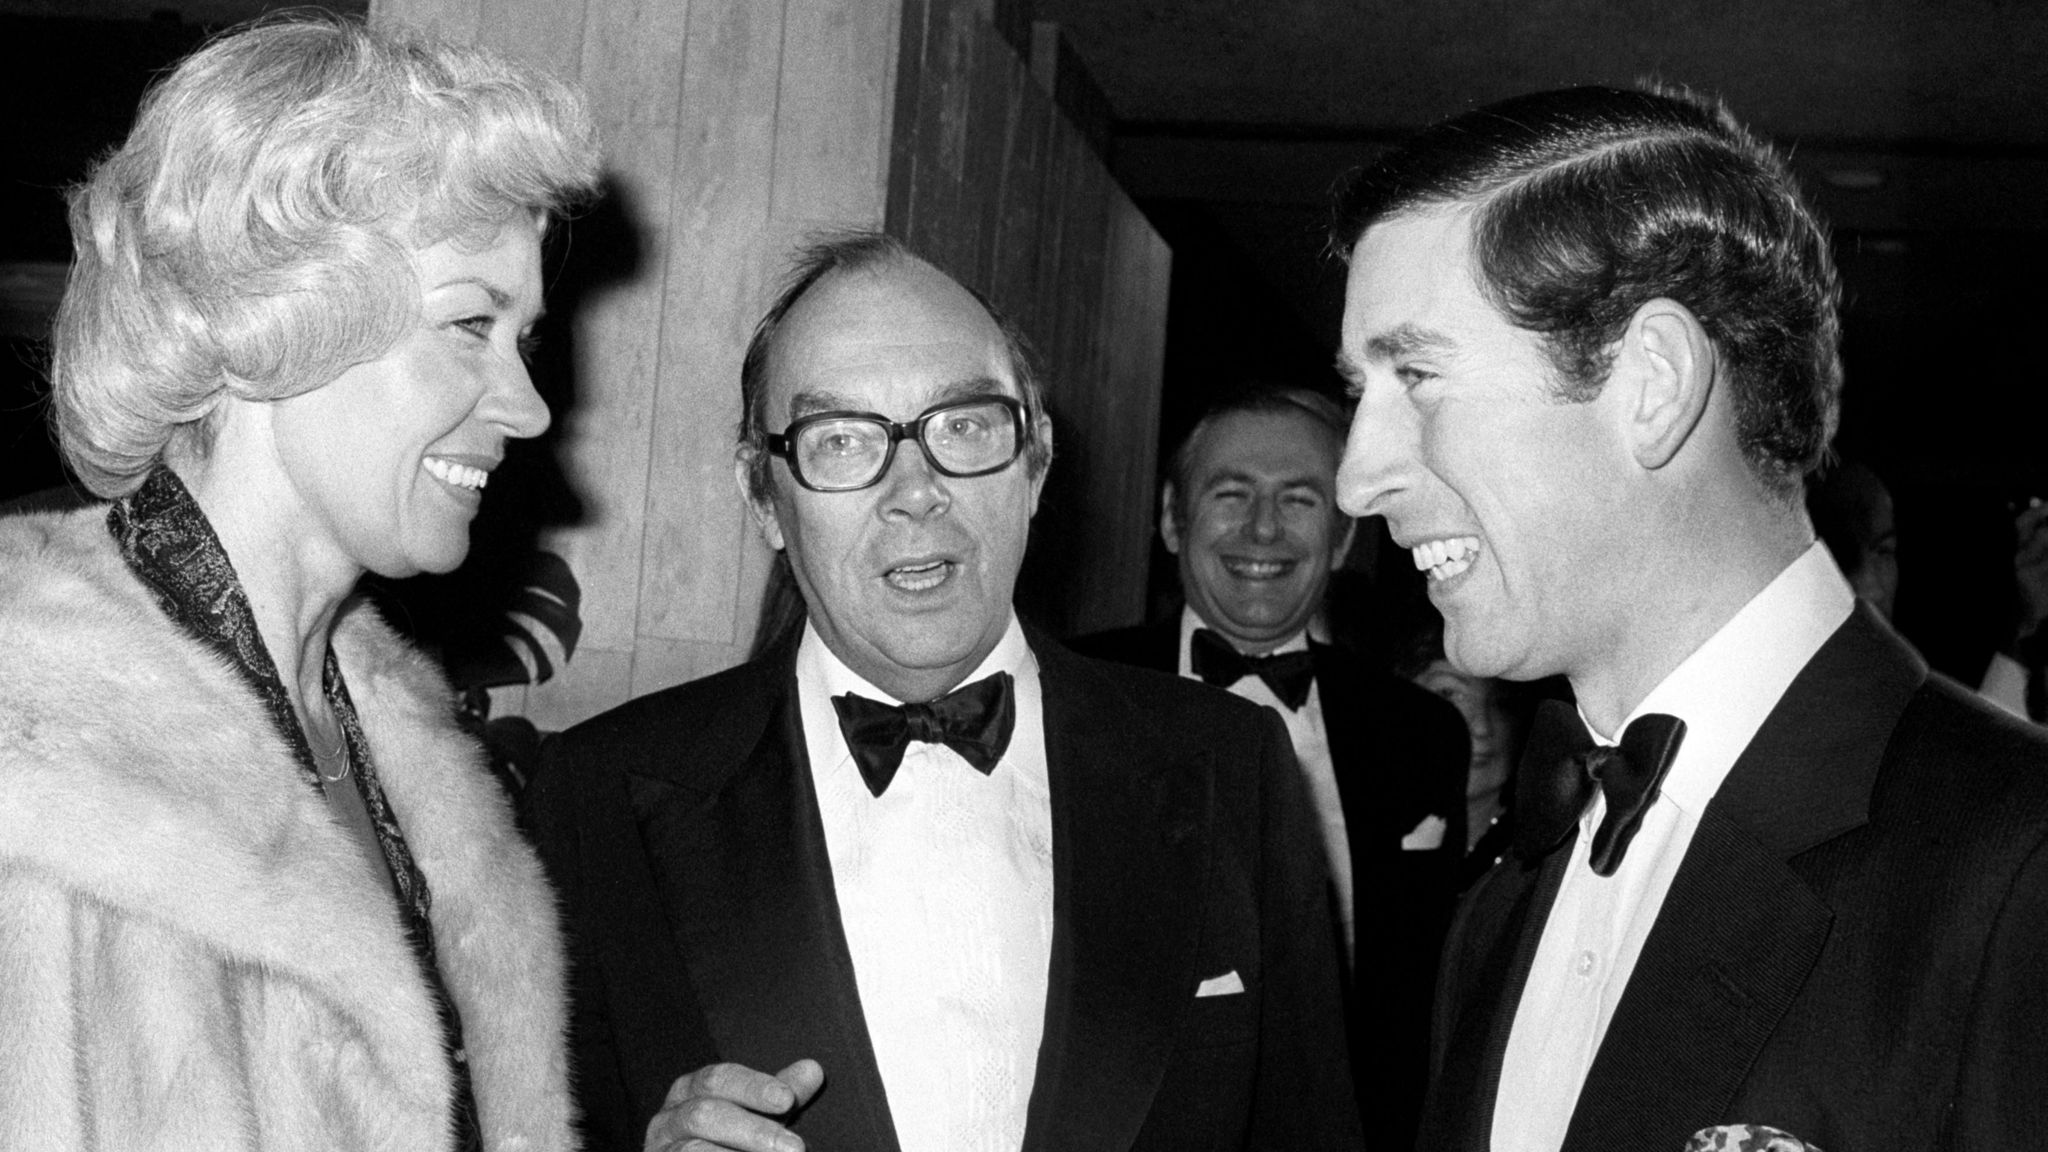 Joan and Eric share a joke with then Prince Charles in 1979